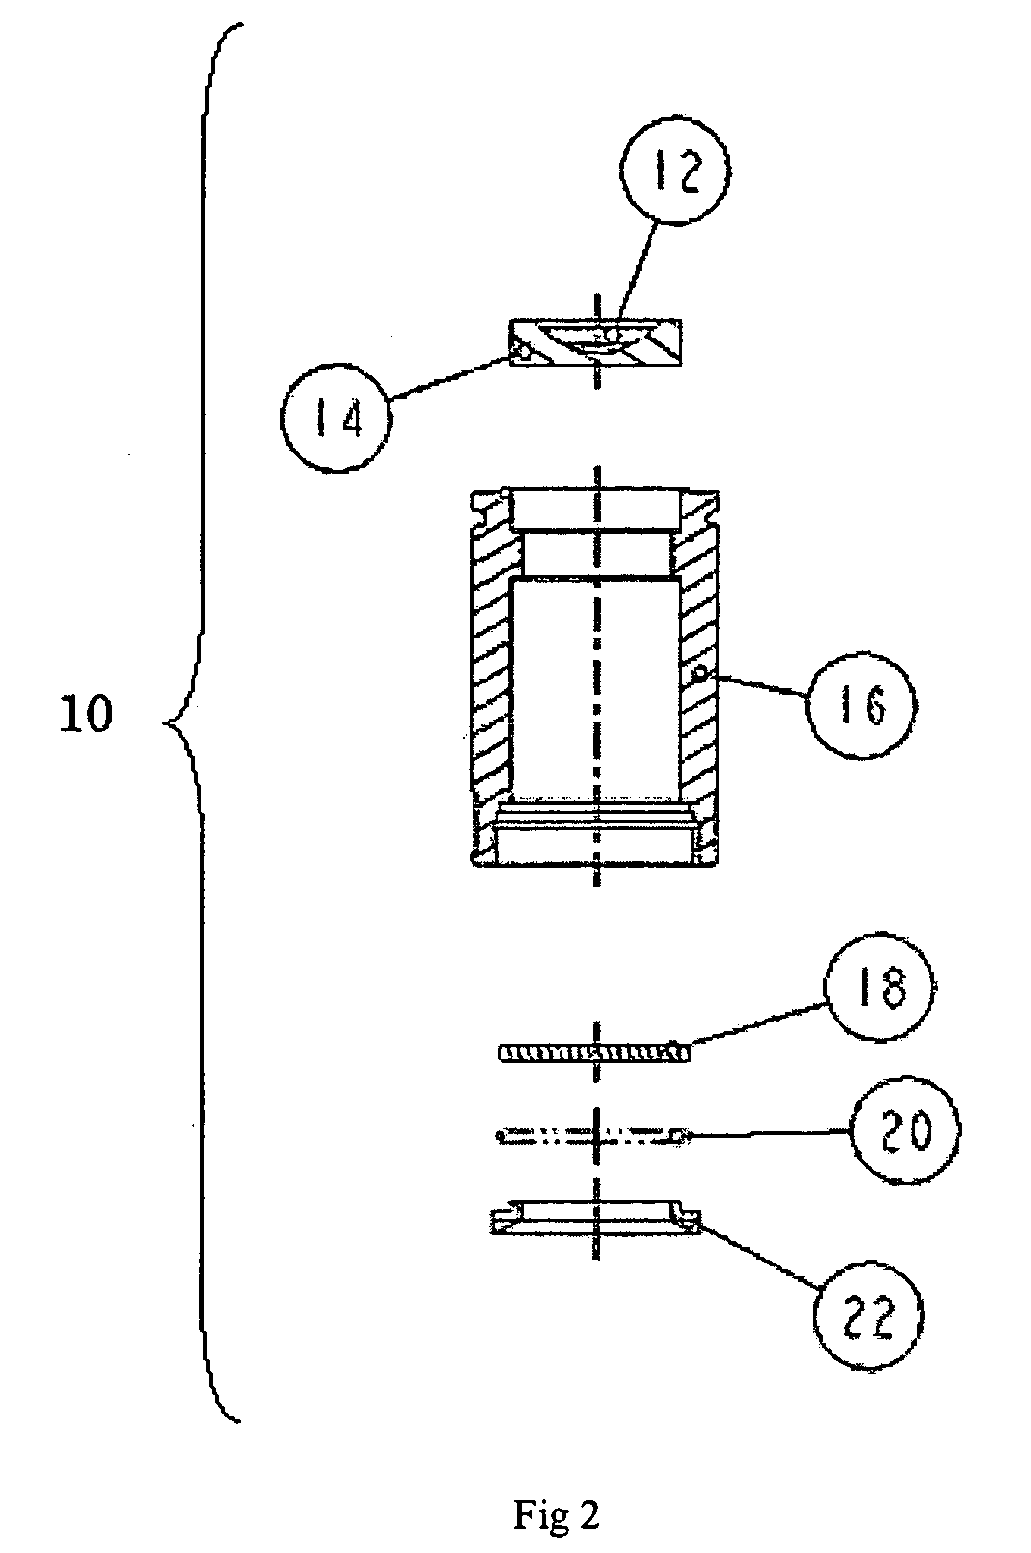 System and method for curing polymeric moldings